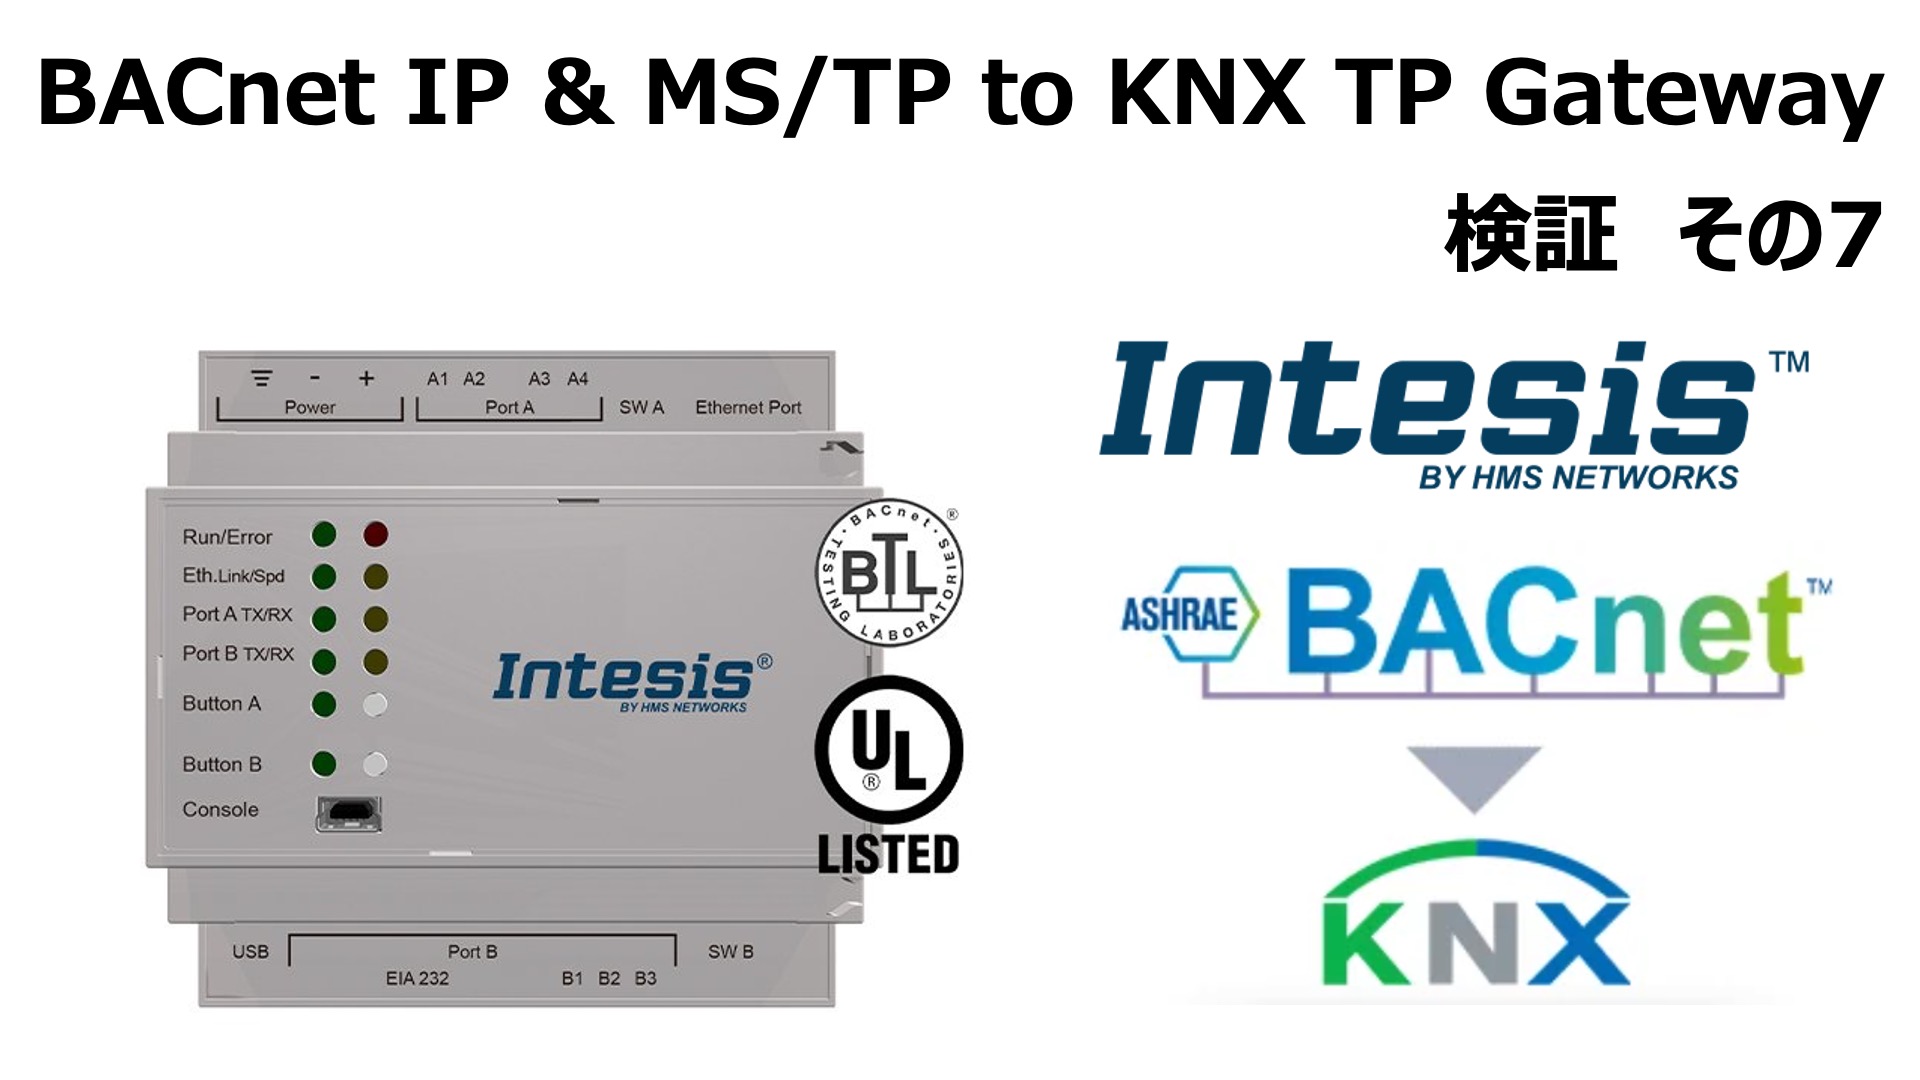 INTESIS BACnet IP & MS/TP Client to KNX TP Gateway 検証その7